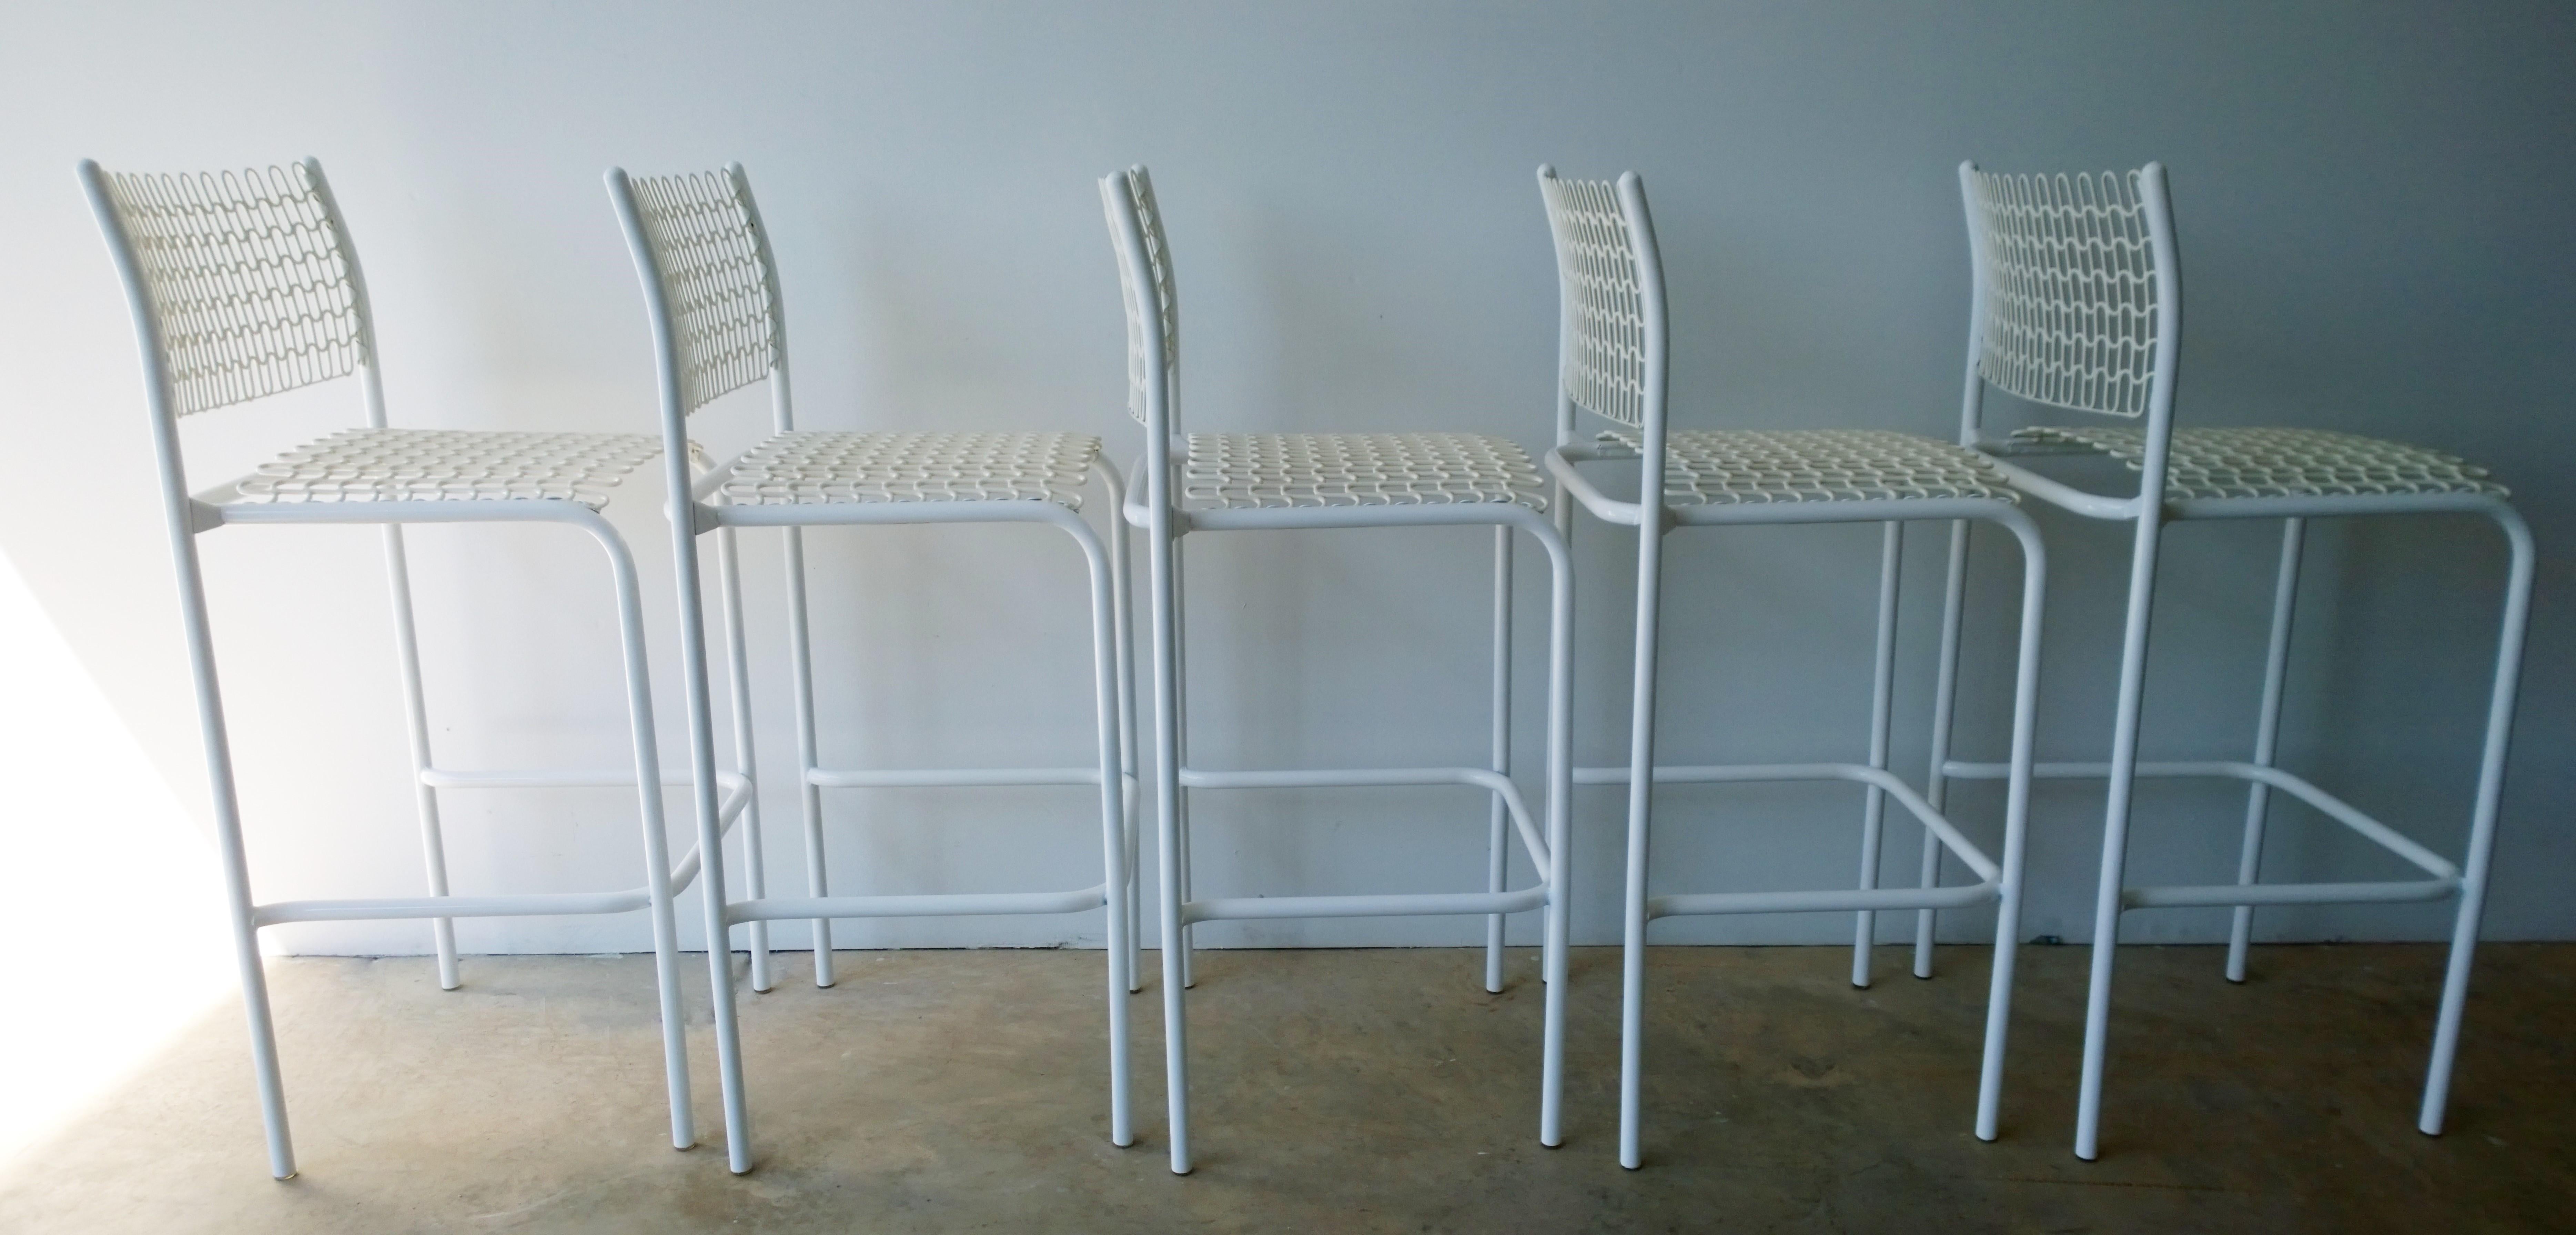 20th Century Set of 5 David Rowland for Thonet Sof-Tek White Patio Indoor/ Outdoor Bar Stools For Sale